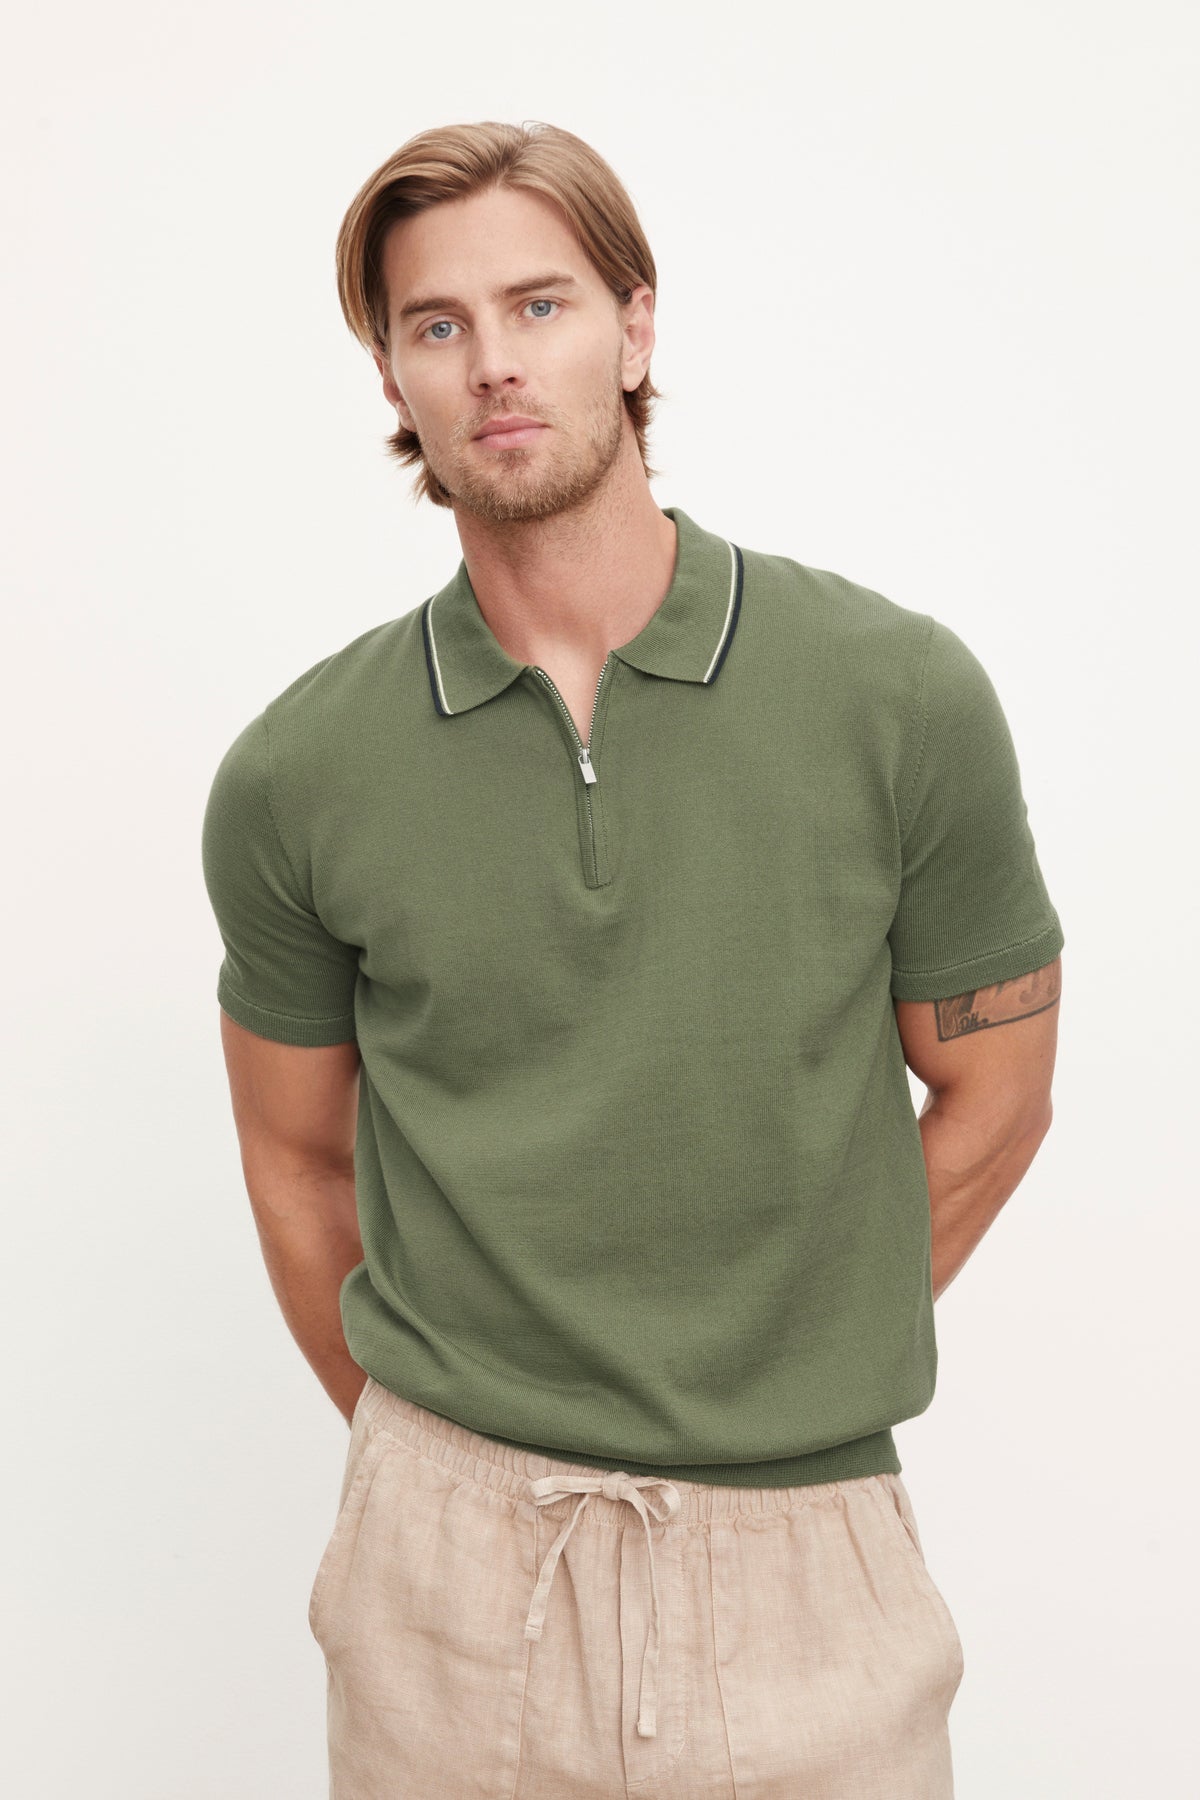 A man in an OTTO ZIP POLO by Velvet by Graham & Spencer.-36009964011713